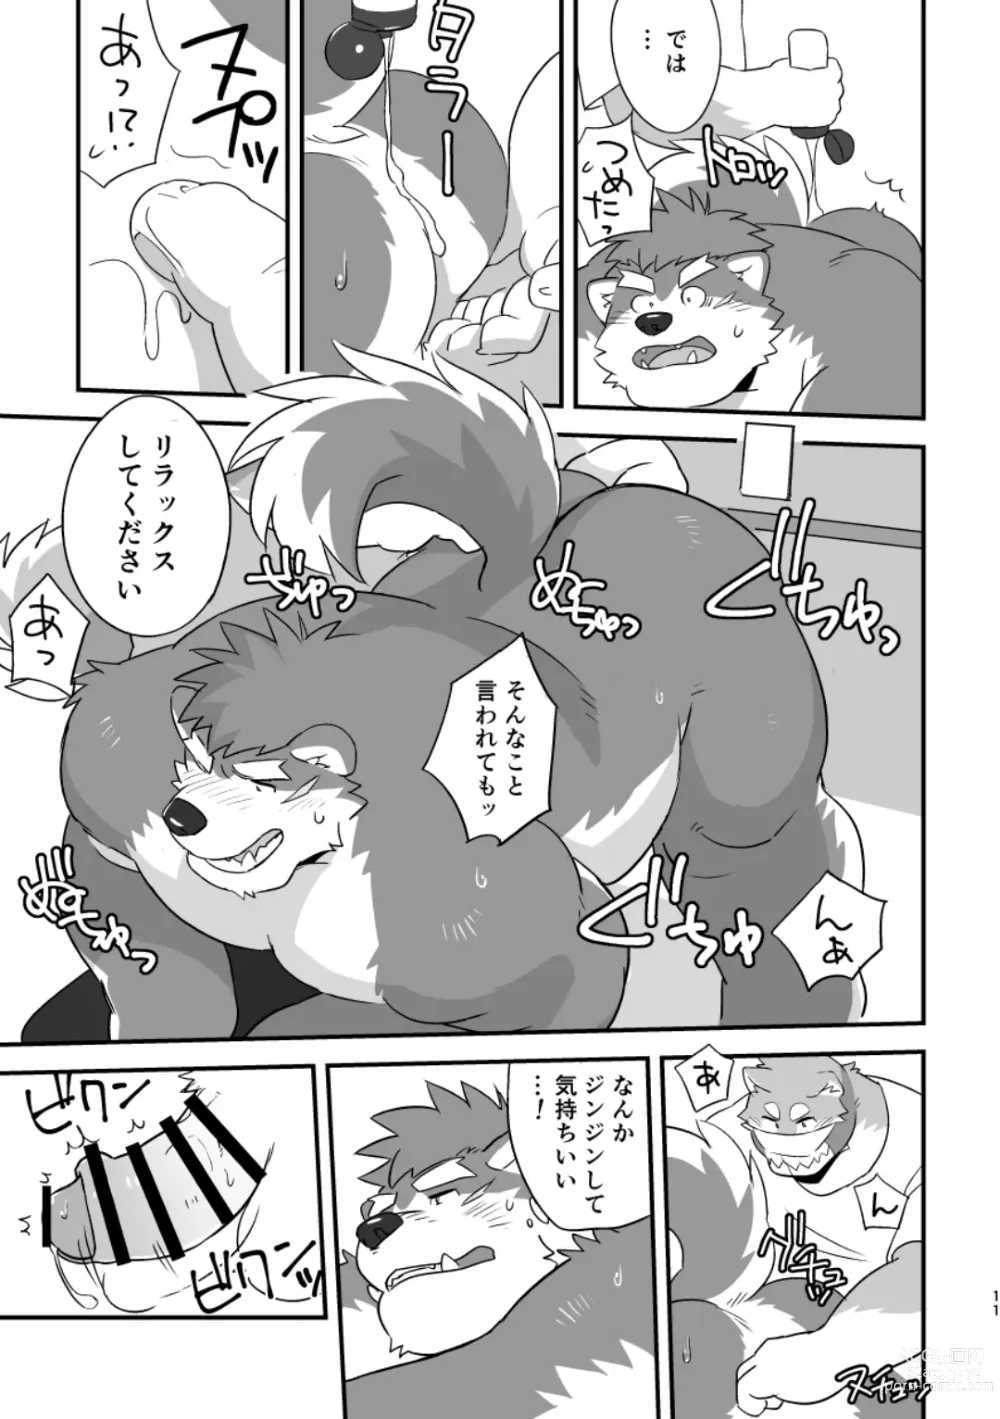 Page 11 of doujinshi LIVECAMS!